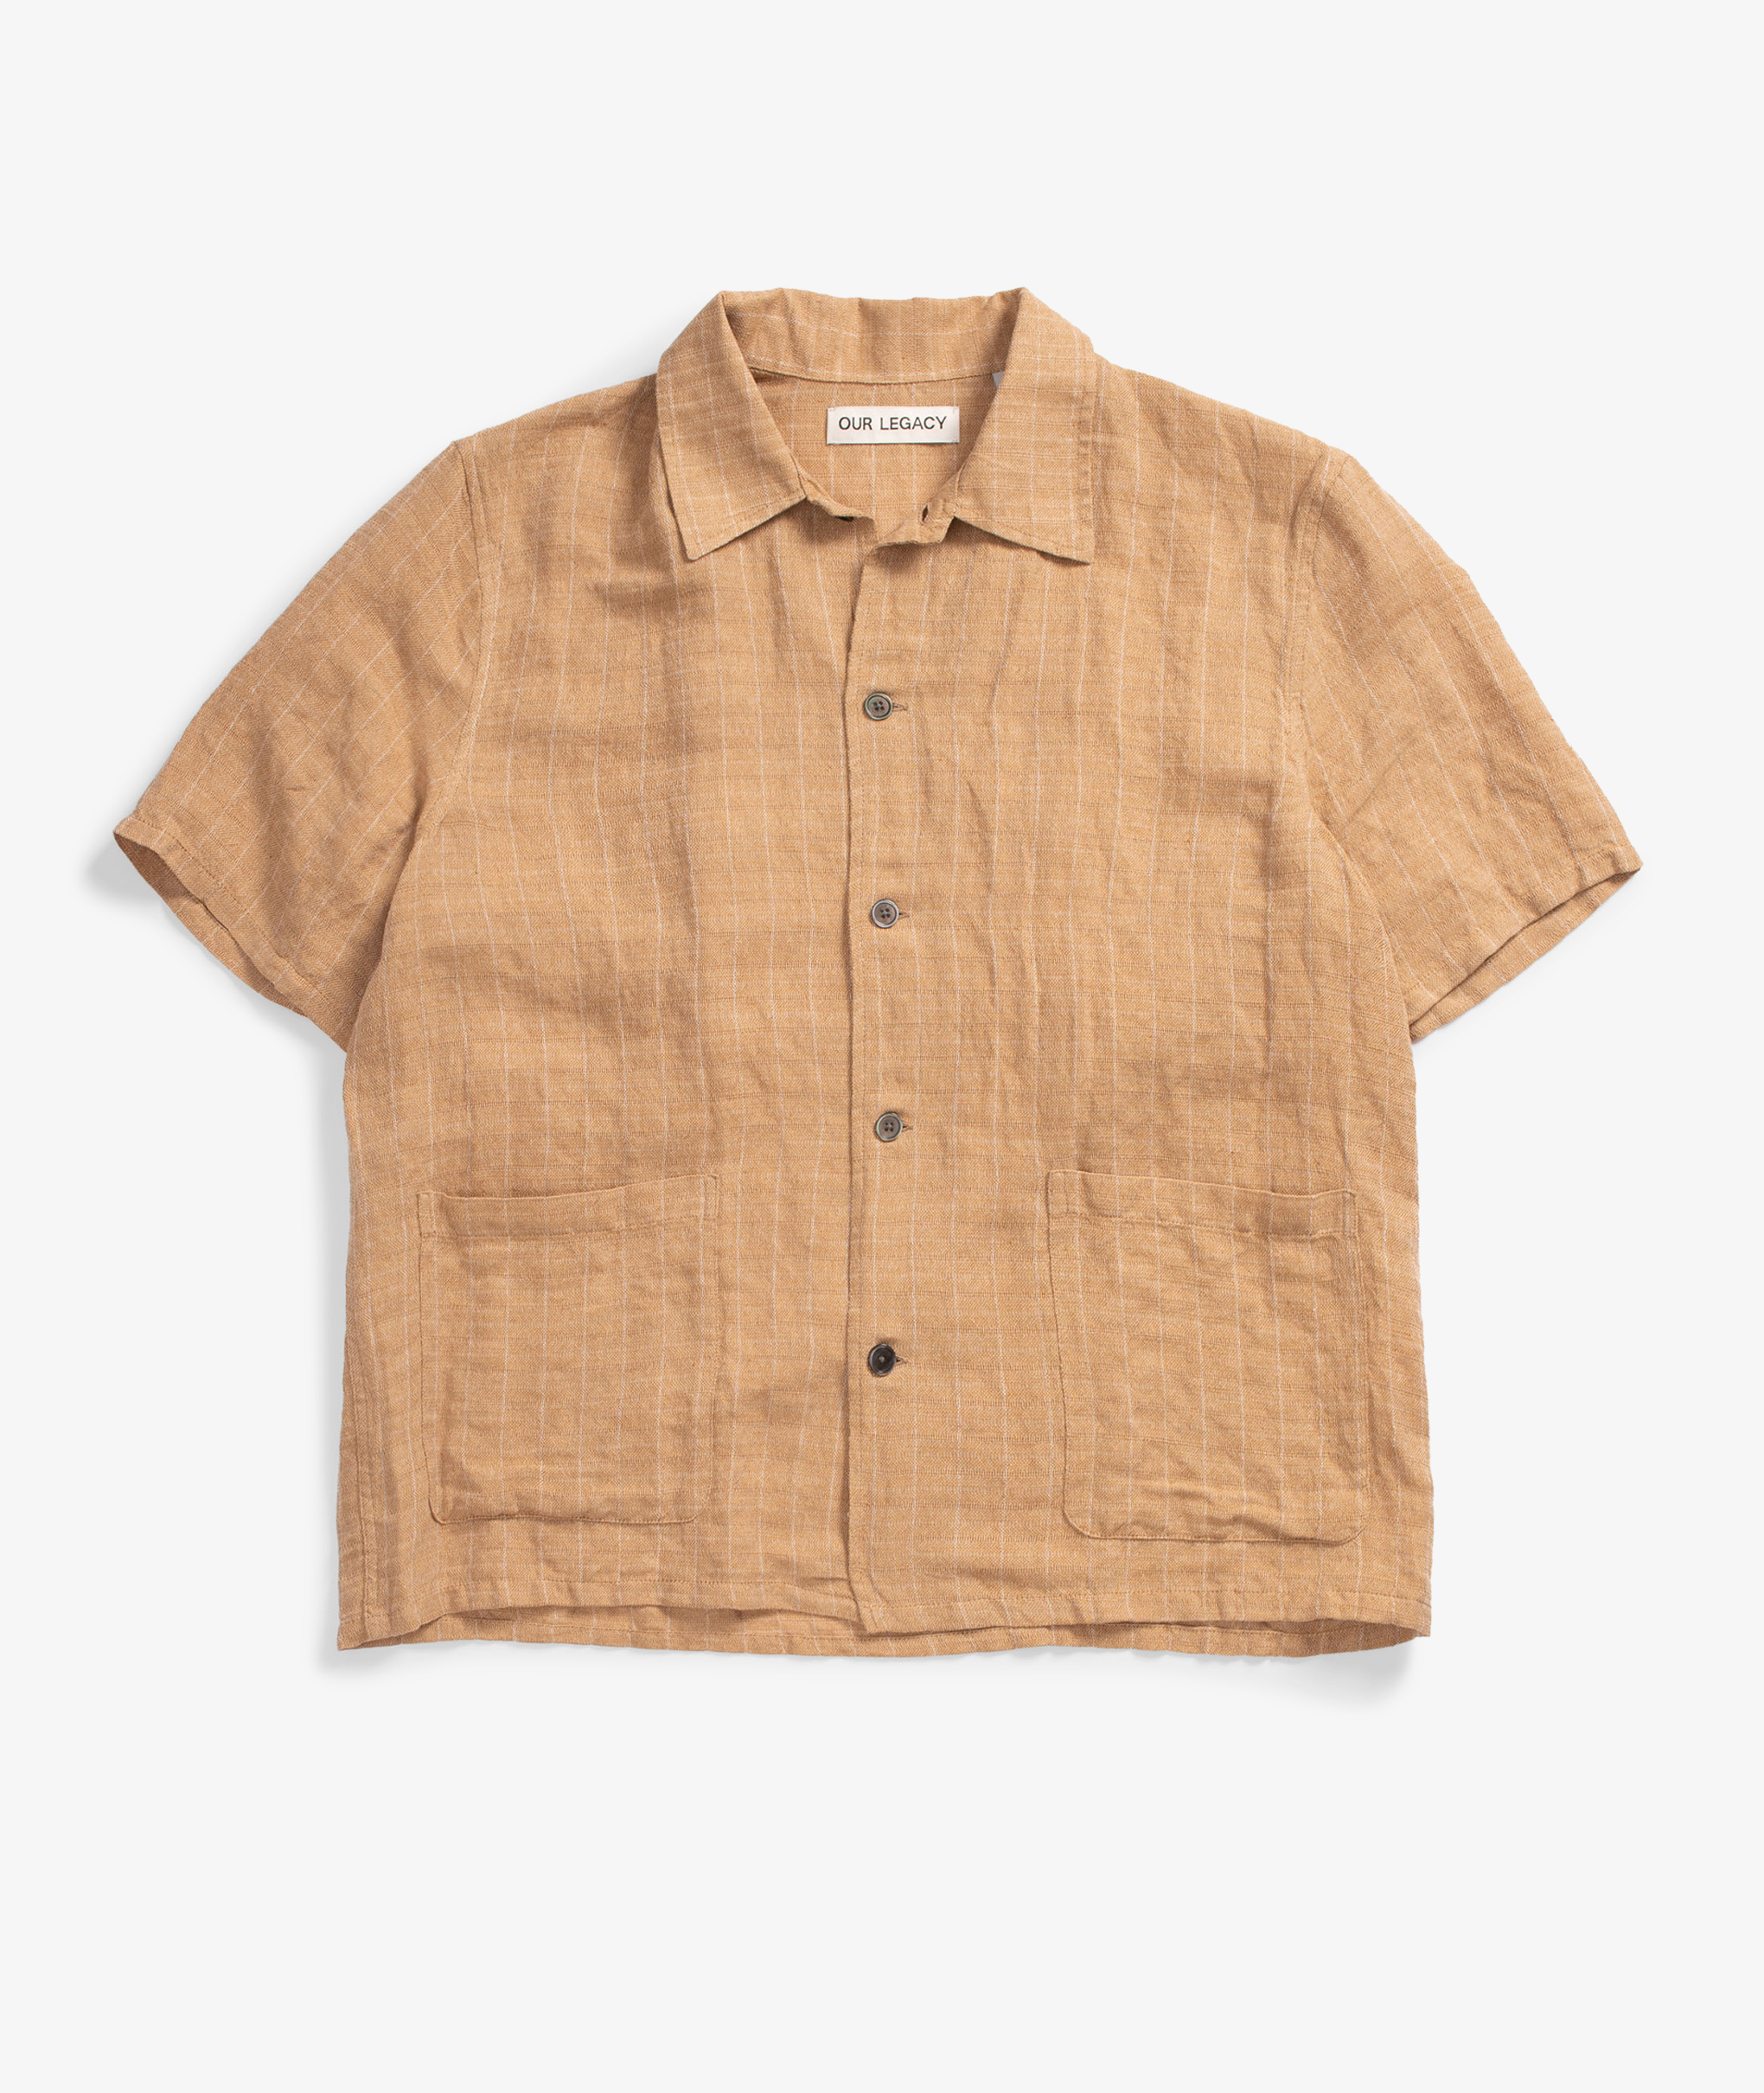 Norse Store | Shipping Worldwide - Our Legacy ELDER SHIRT SHORTSLEEVE ...